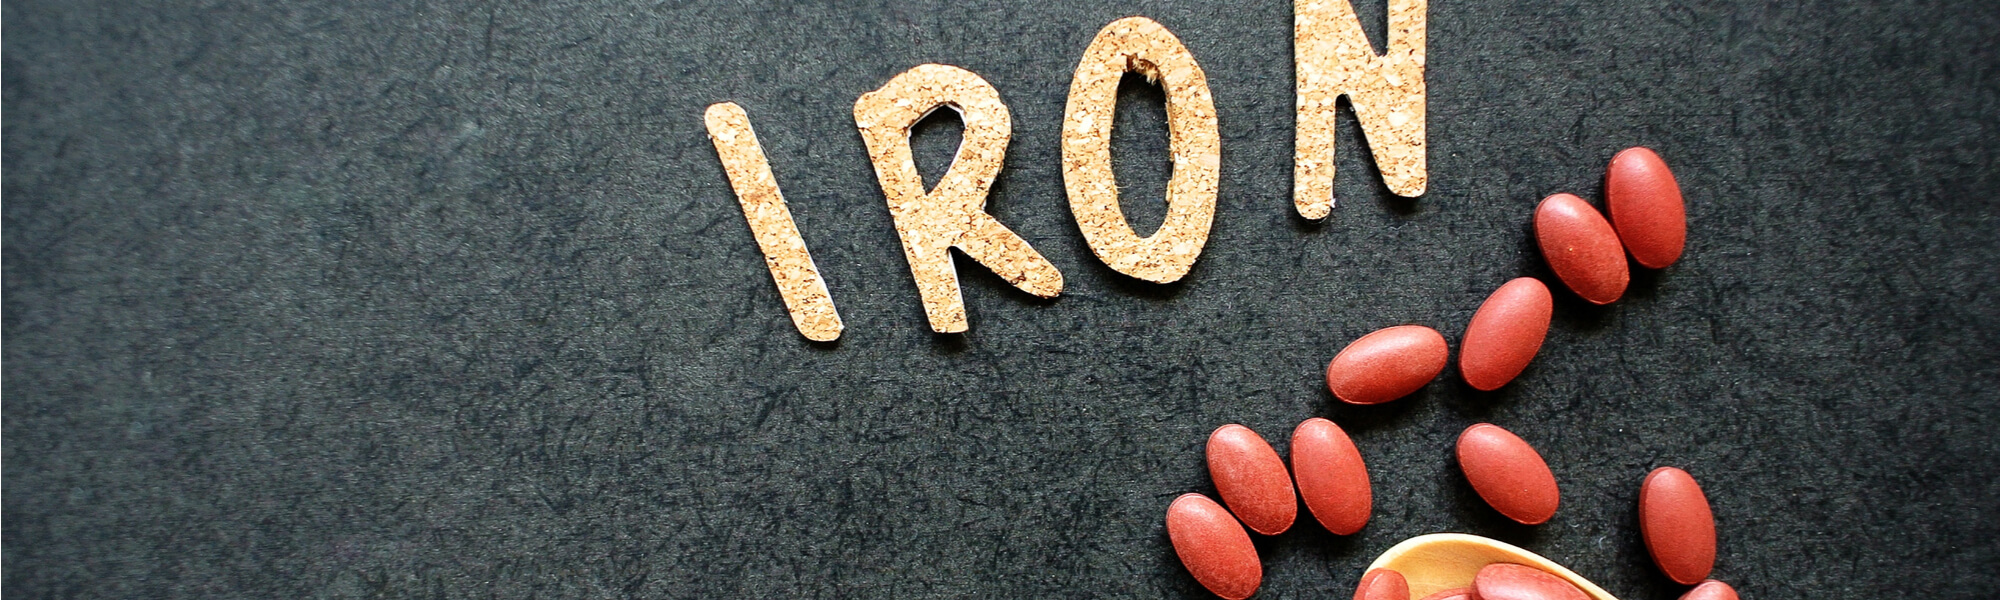 Does Iron Cause Constipation? A Closer Look